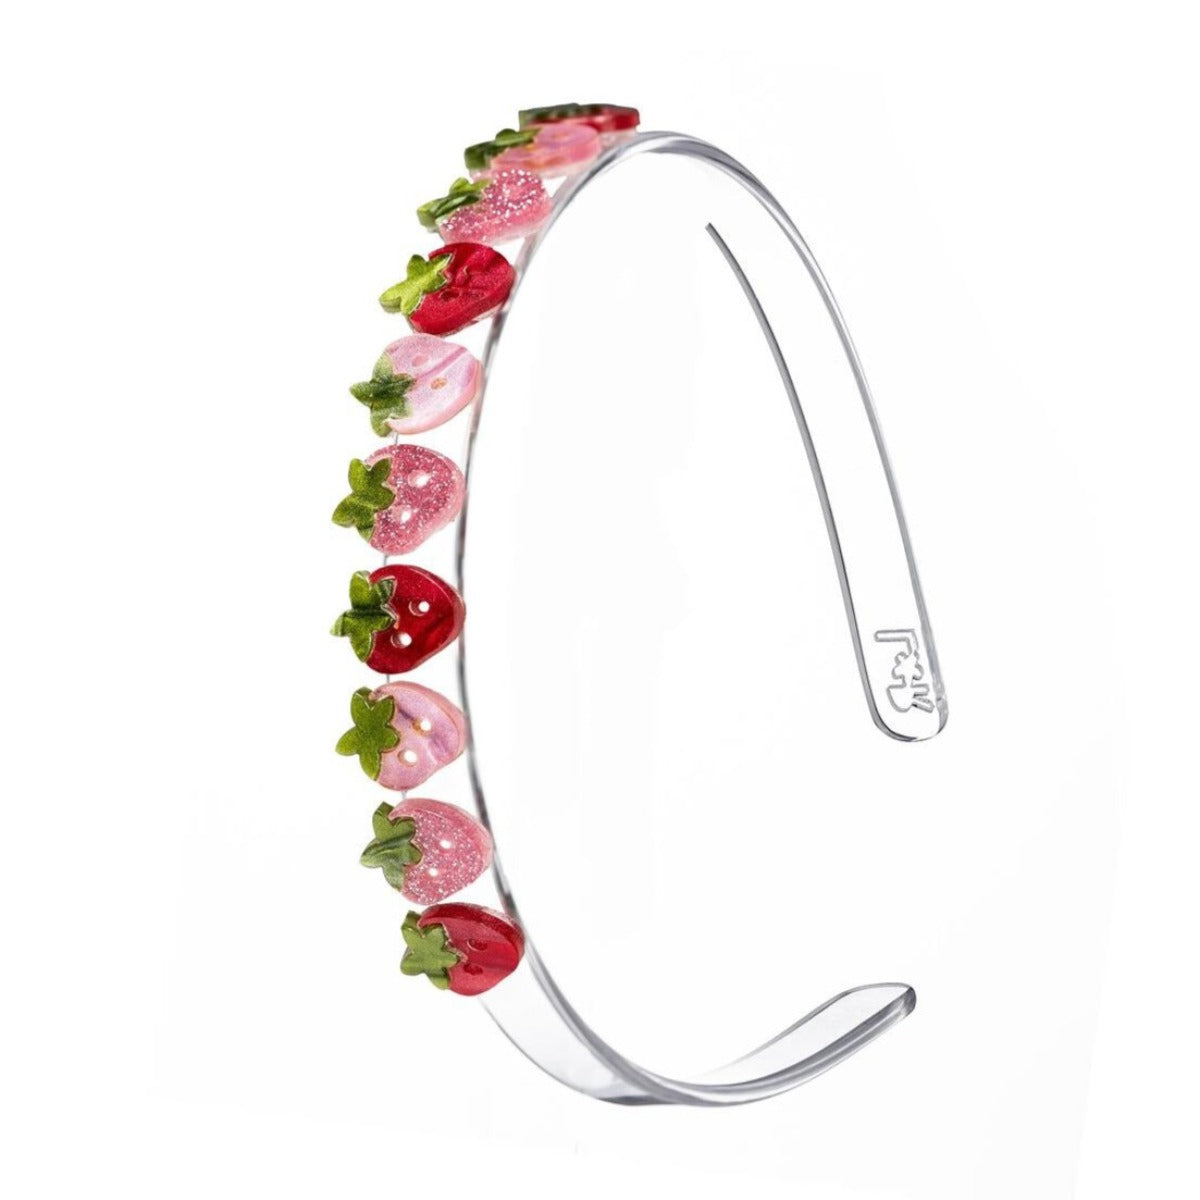 Satin Strawberries Pearlized Acrylic Headband by Lilies & Roses